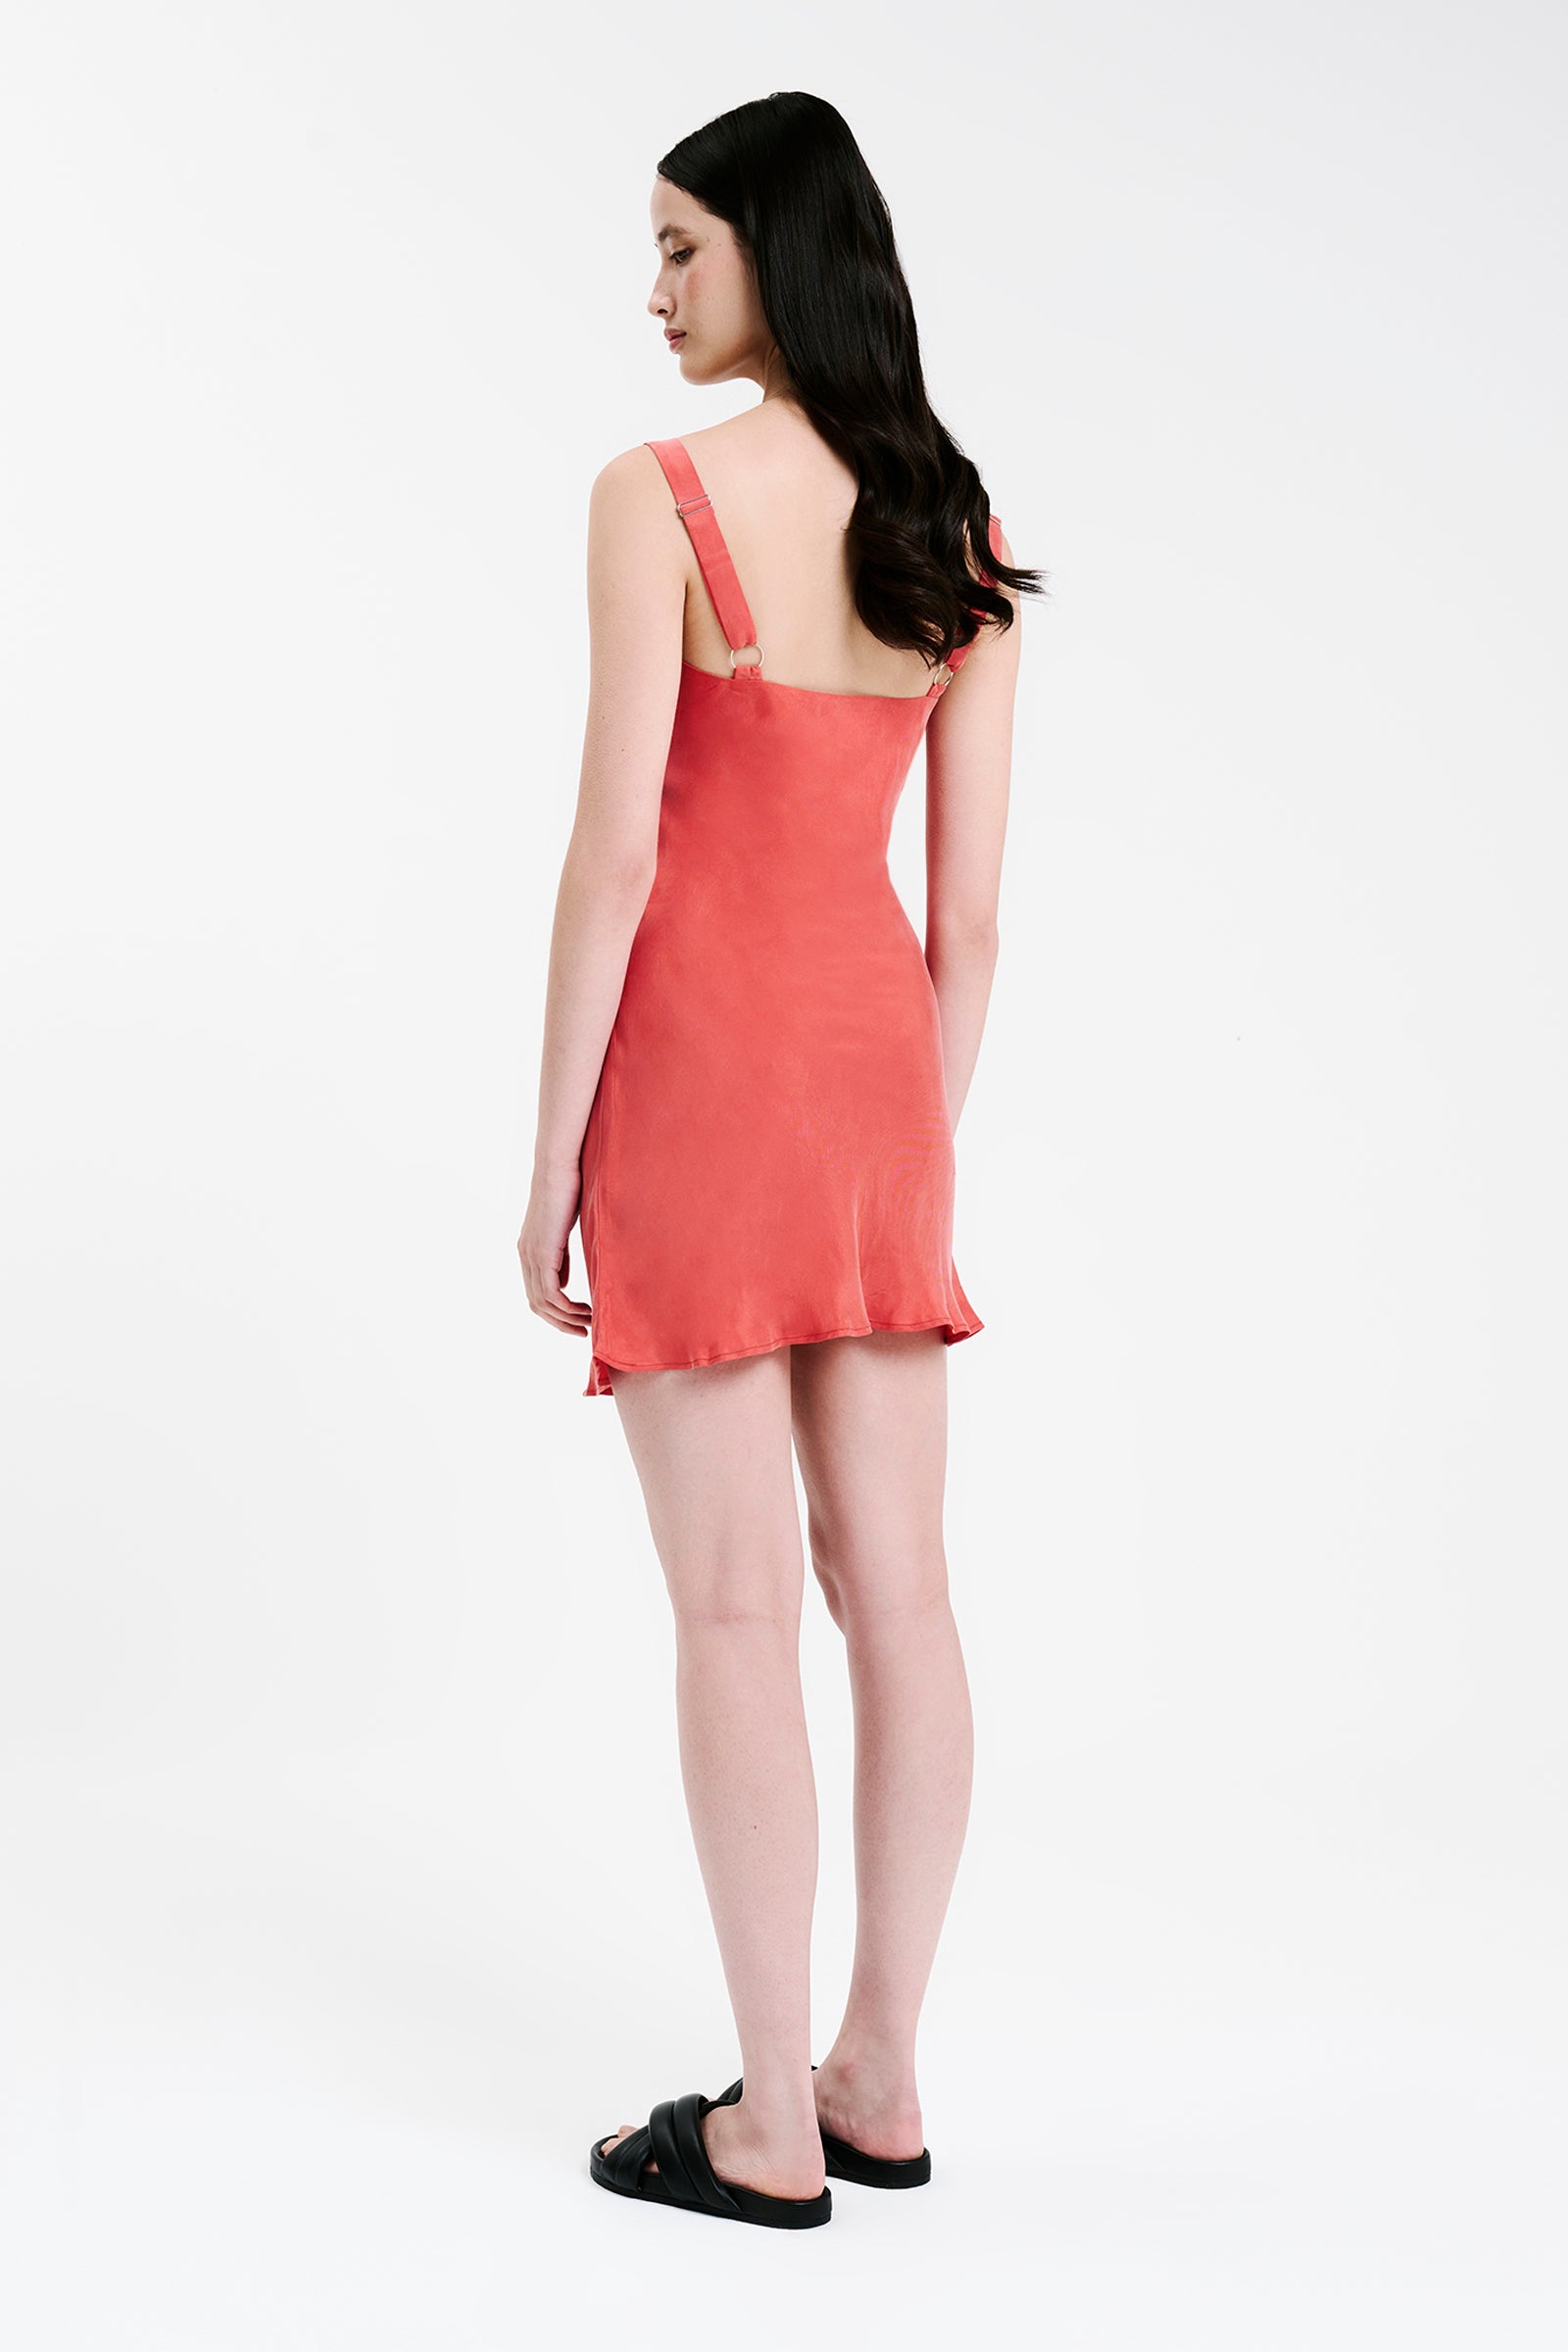 Nude Lucy Harlow Cupro Mini Dress in a Pink & Orange Toned Coral Colour